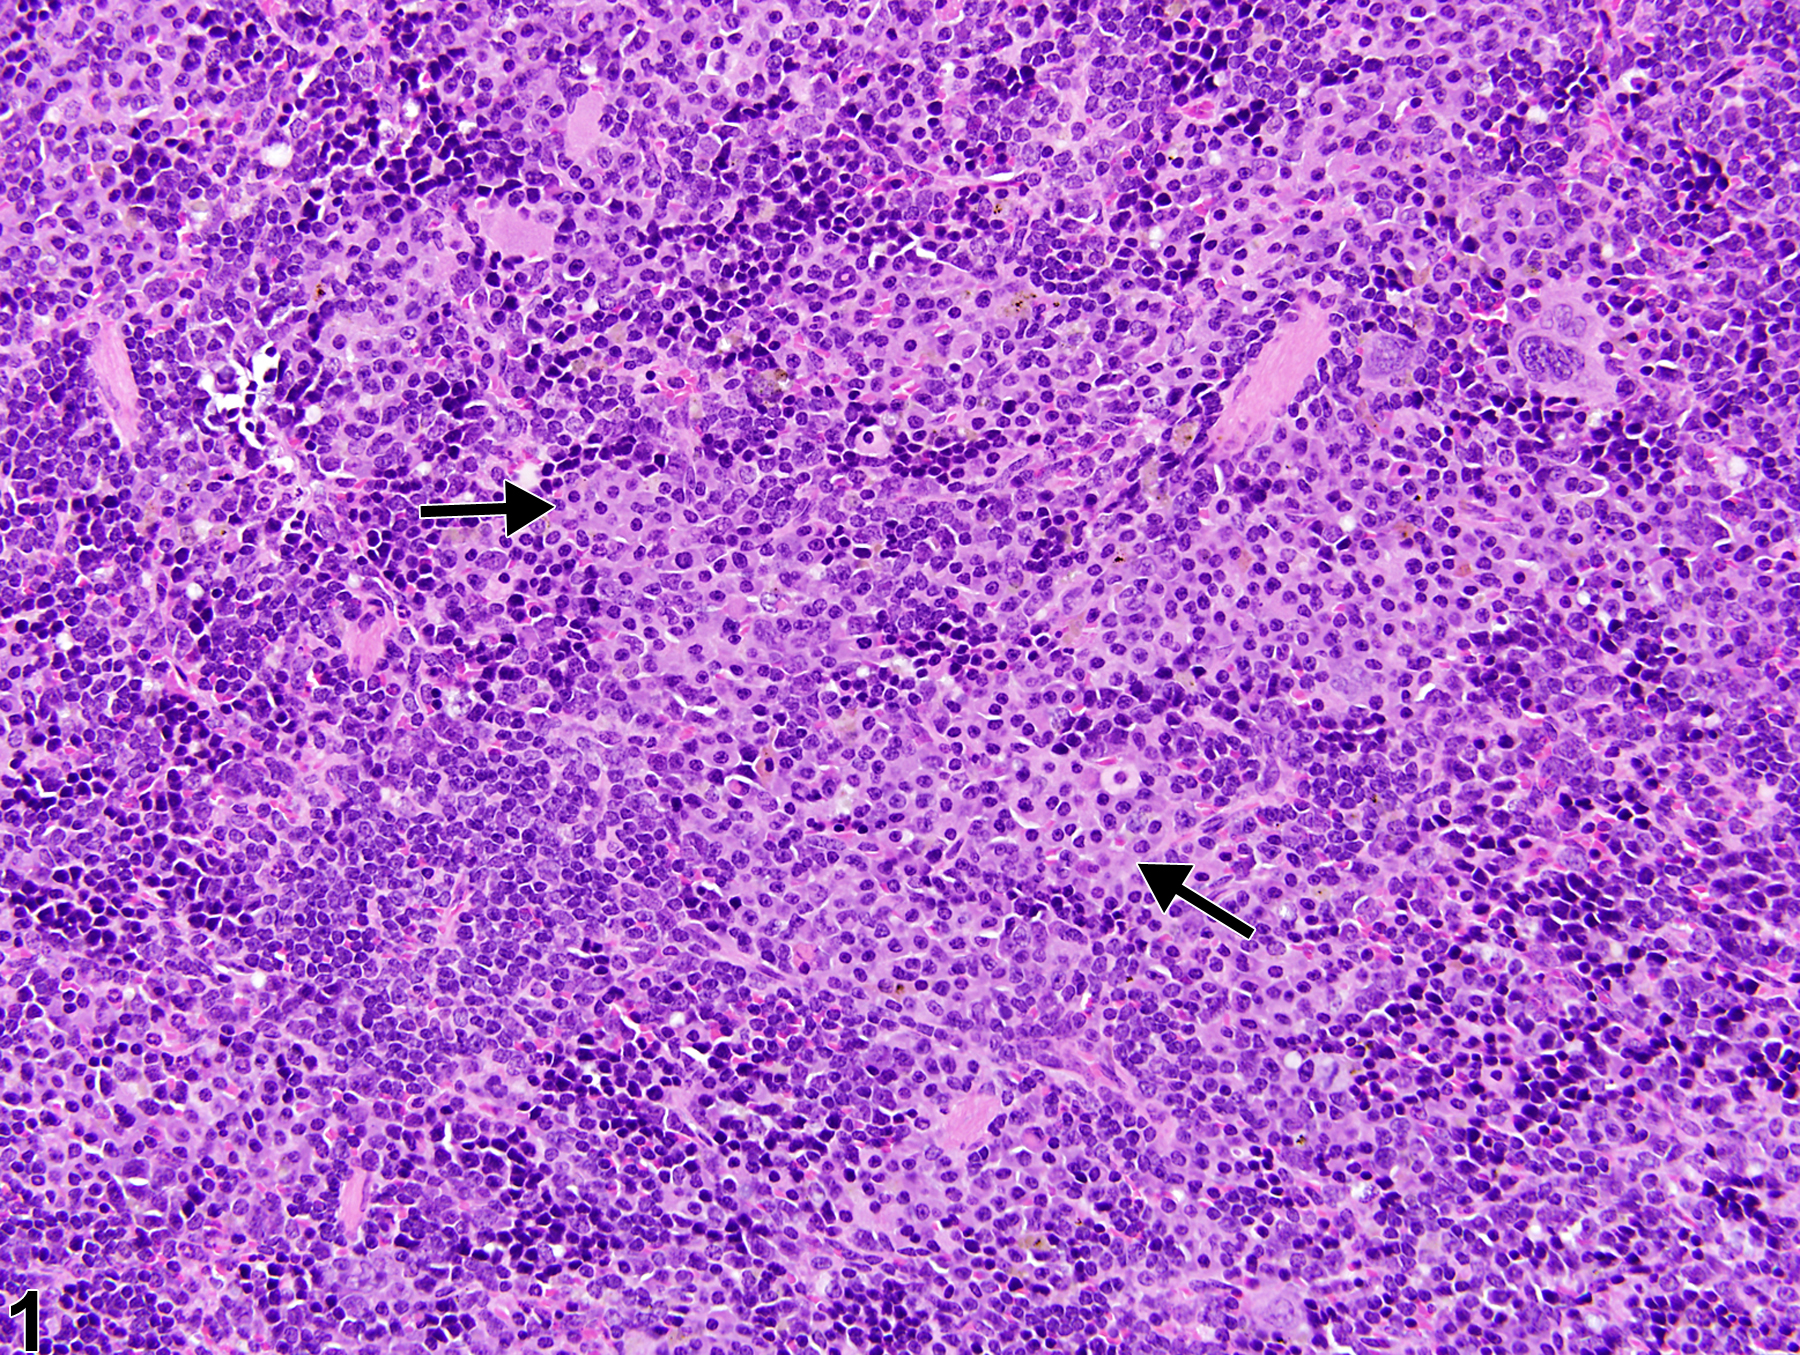 Image of hyperplasia, plasma cell in the spleen from a female B6C3F1/N mouse in a chronic study